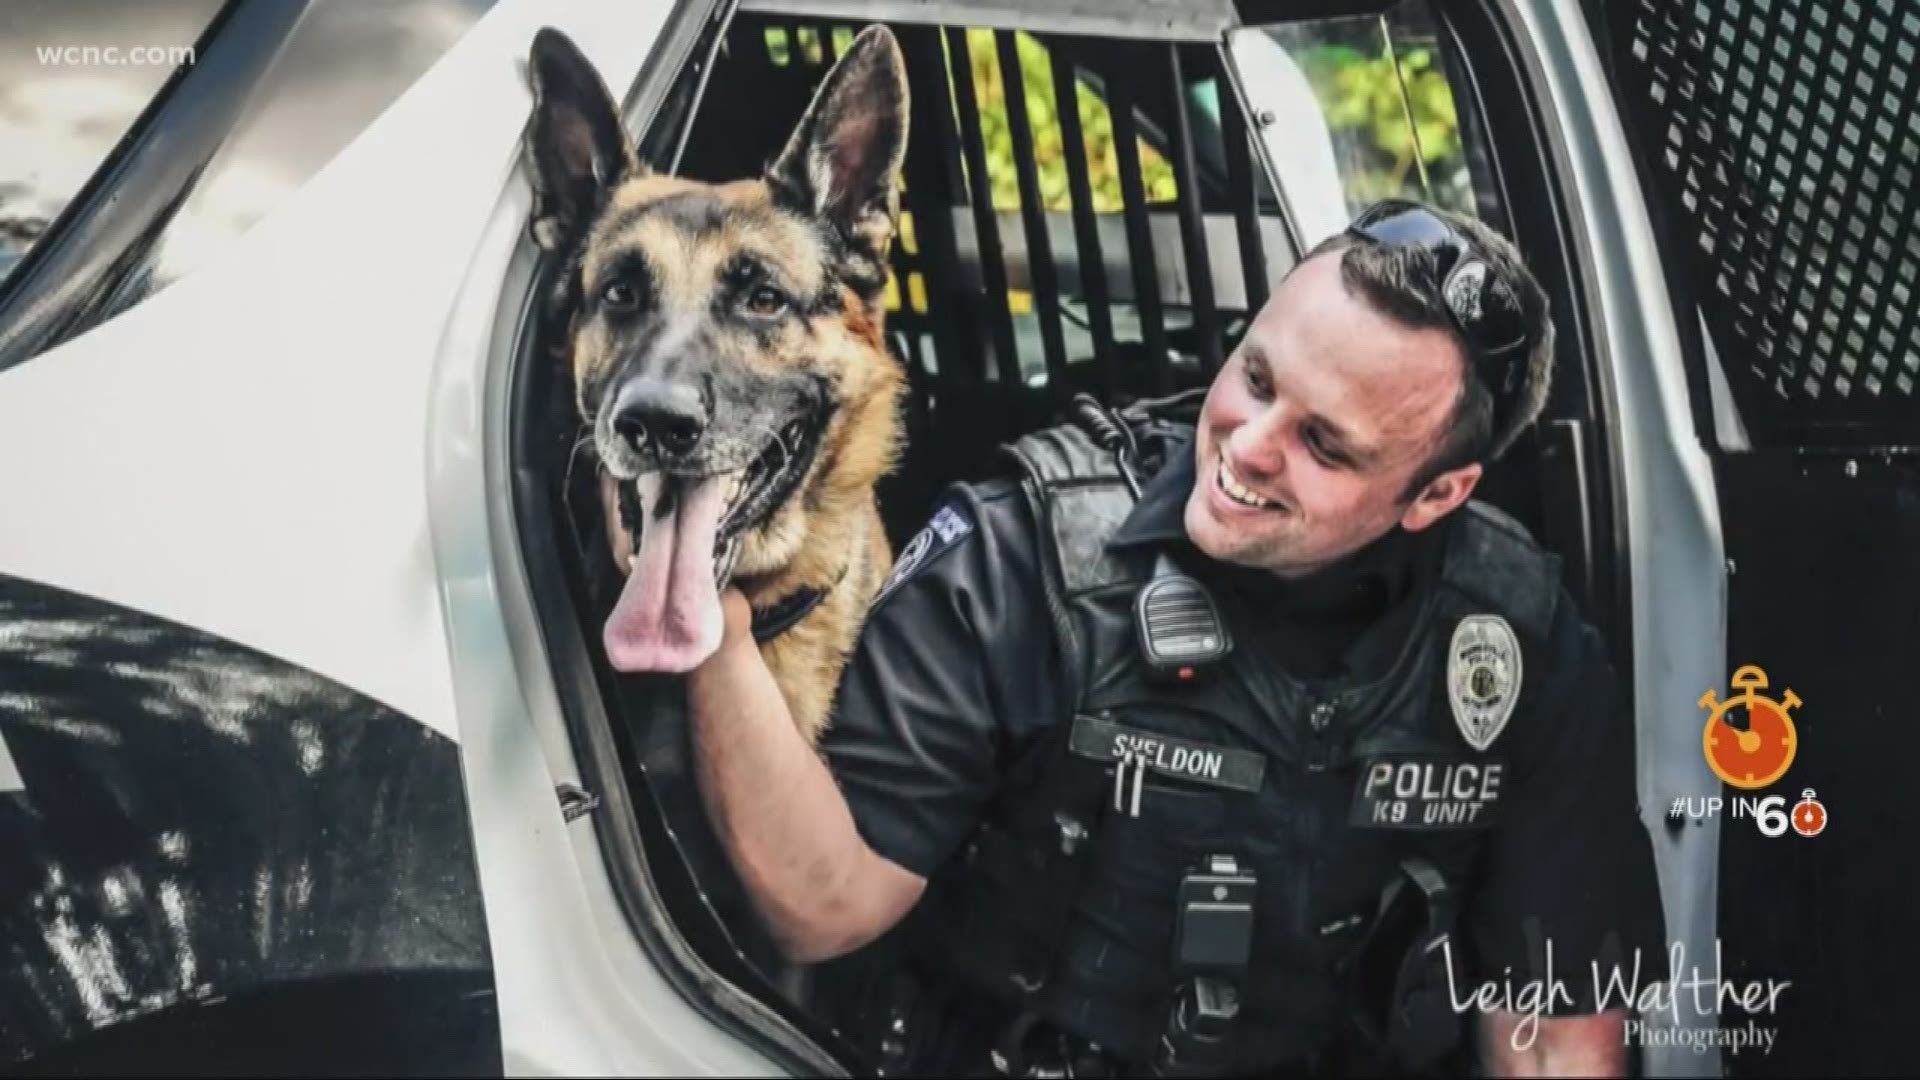 The Mooresville community is coming together one more time for a benefit concert in honor of fallen K-9 Officer Jordan Sheldon. Proceeds will go toward a new scholarship for K-9 officers.